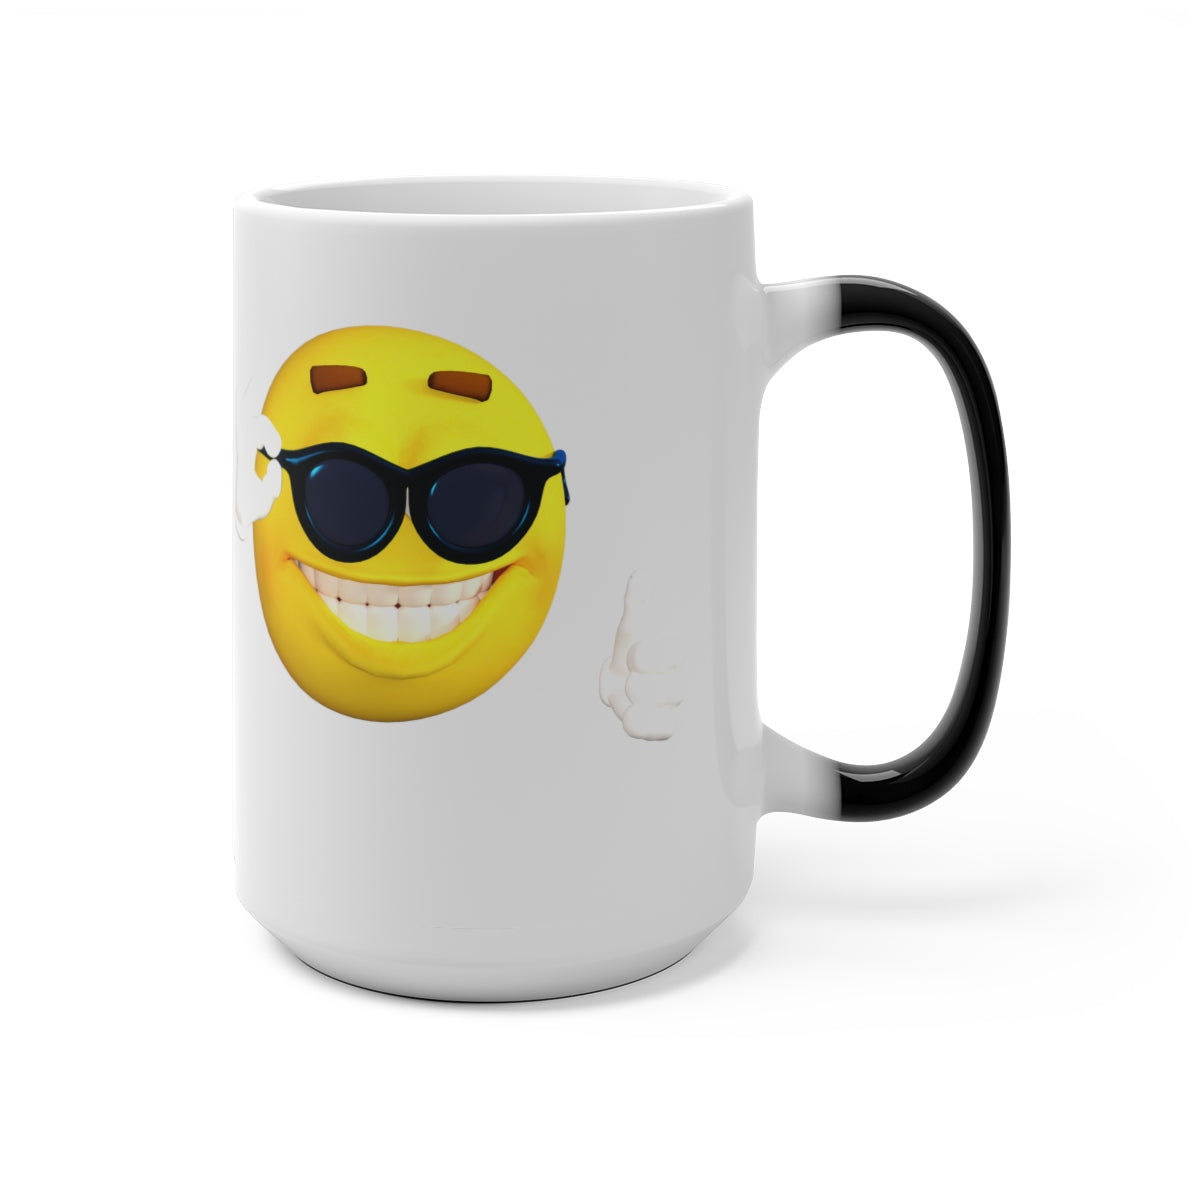 Five Toes Down Henry Color Changing Mug